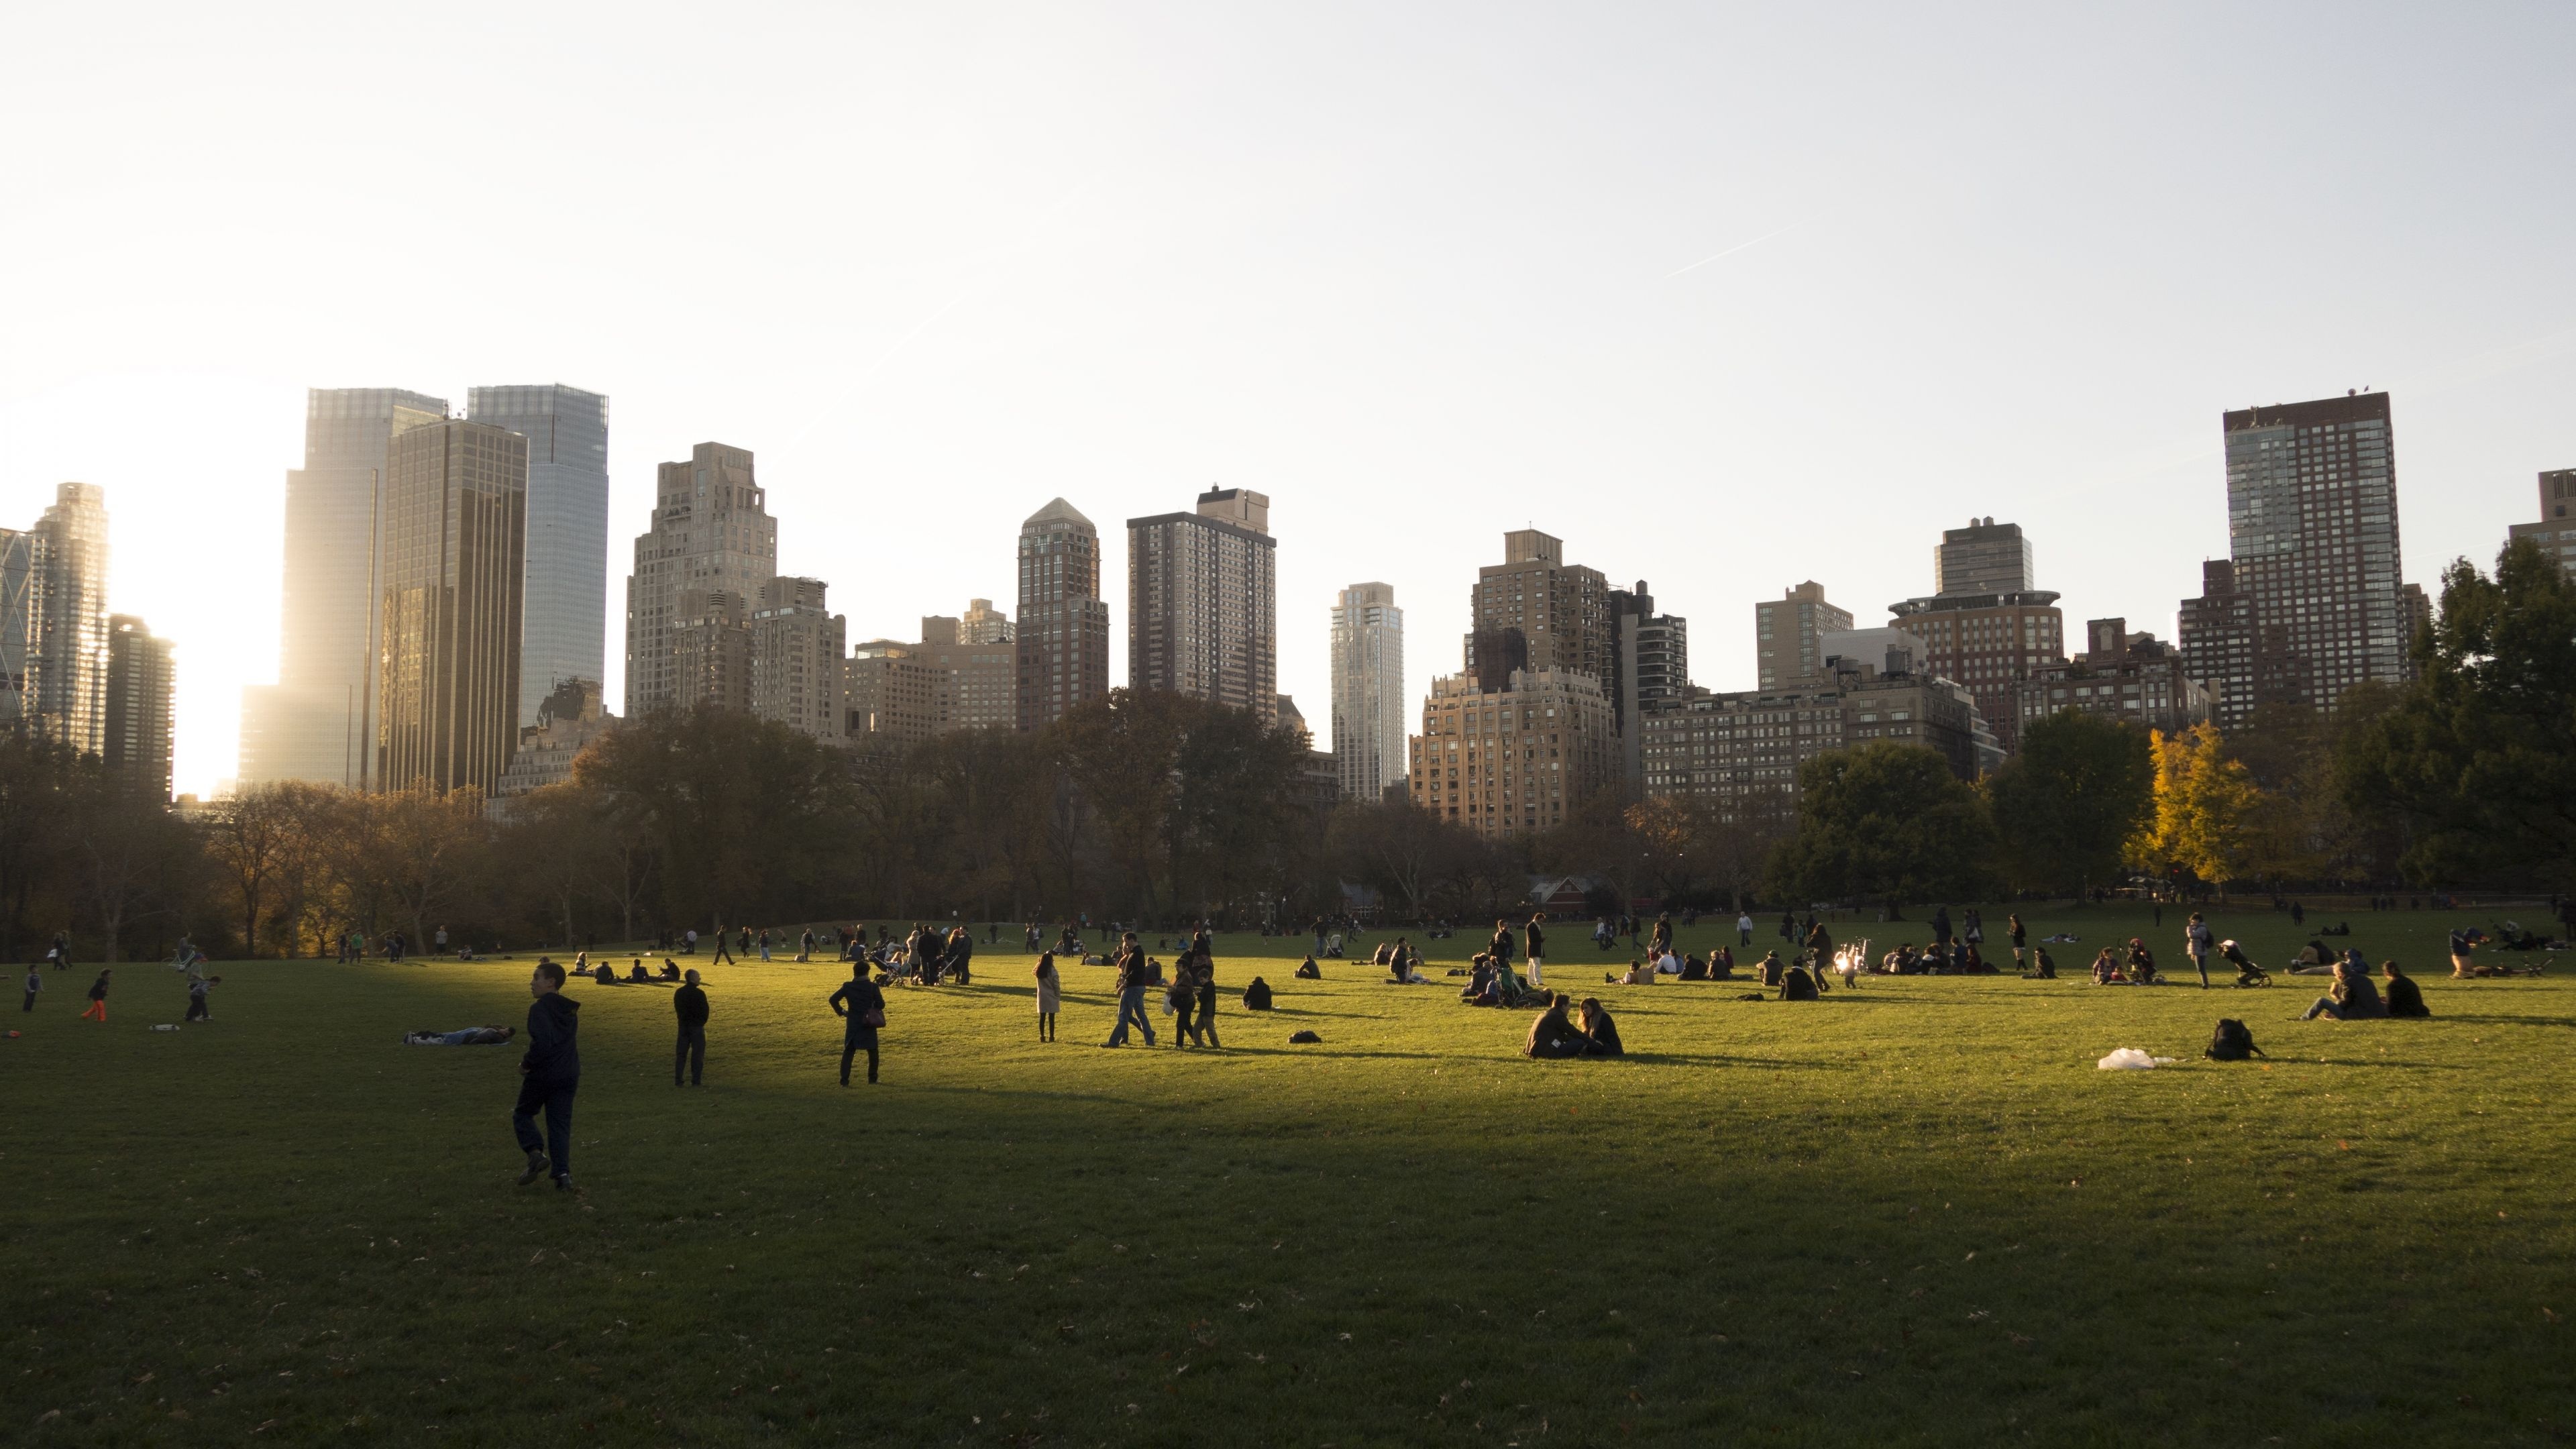 Central Park: An area of open space provided for recreational use, Grassland. 3840x2160 4K Wallpaper.